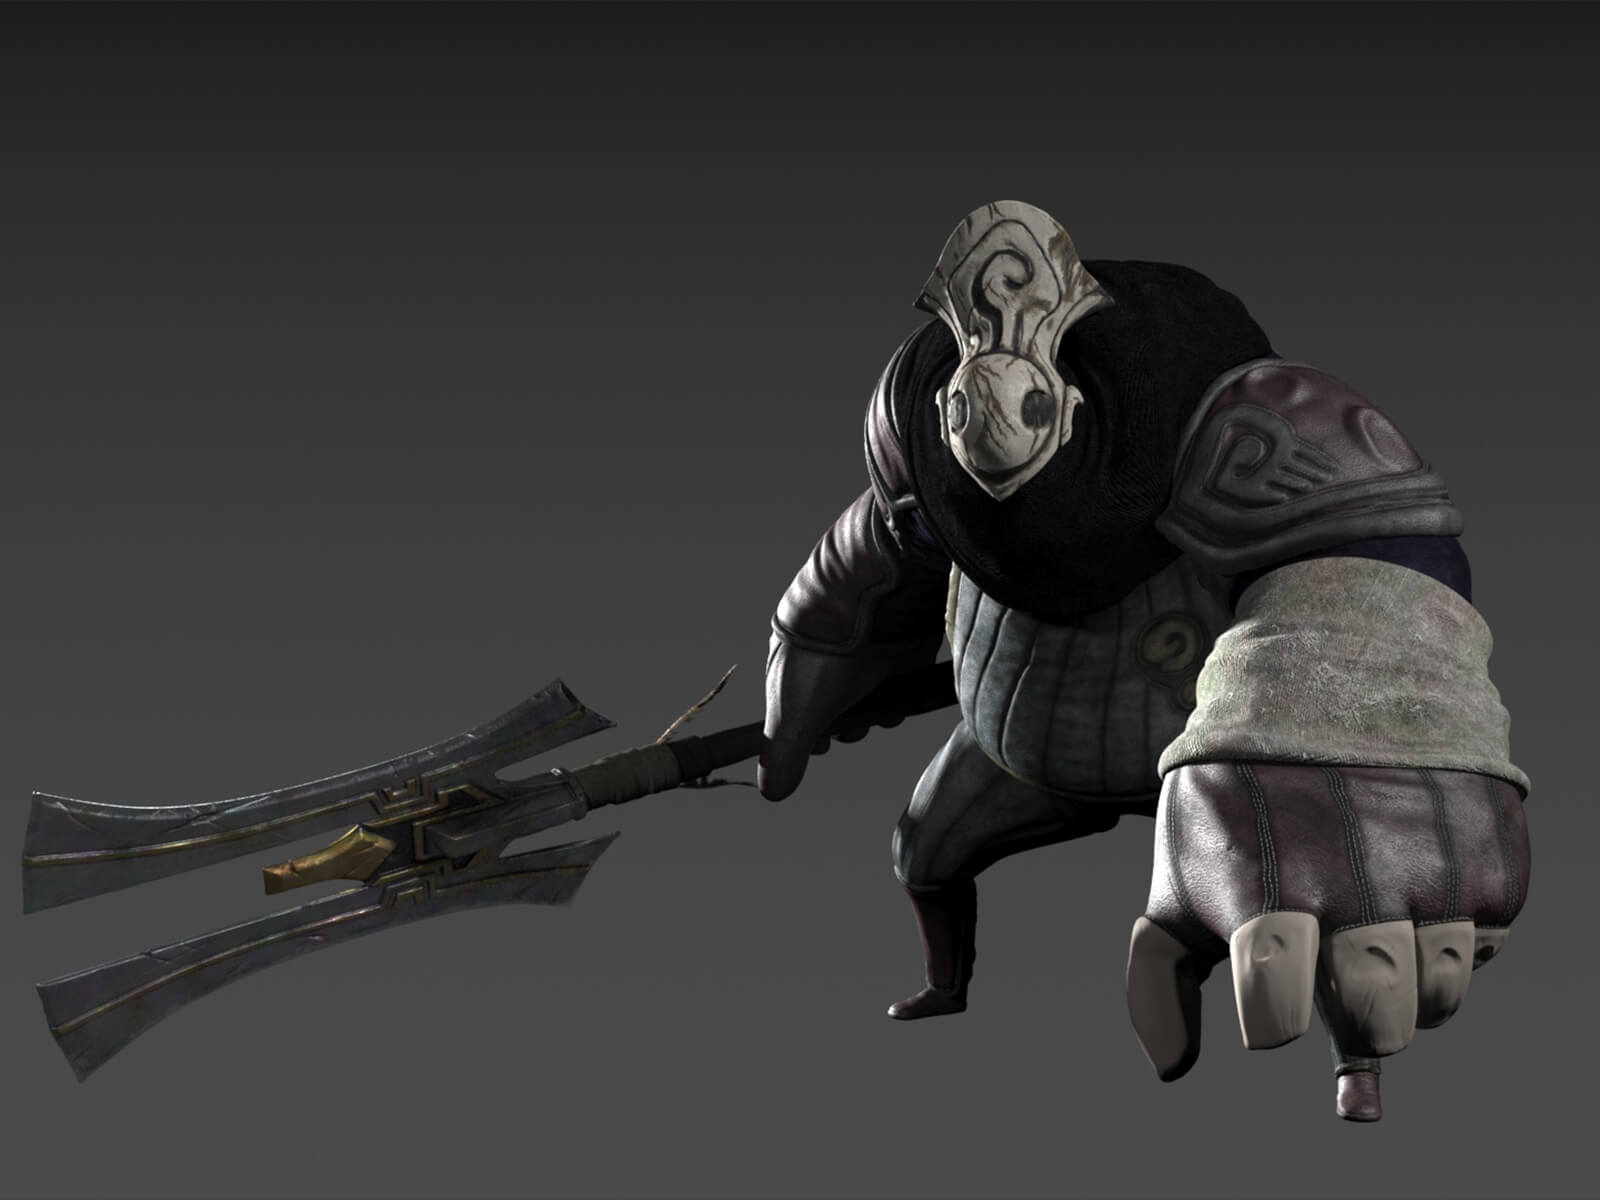 A stocky CG character in cloth battle gear and weathered gray mask holds a large, two-pronged melee weapon at its side.